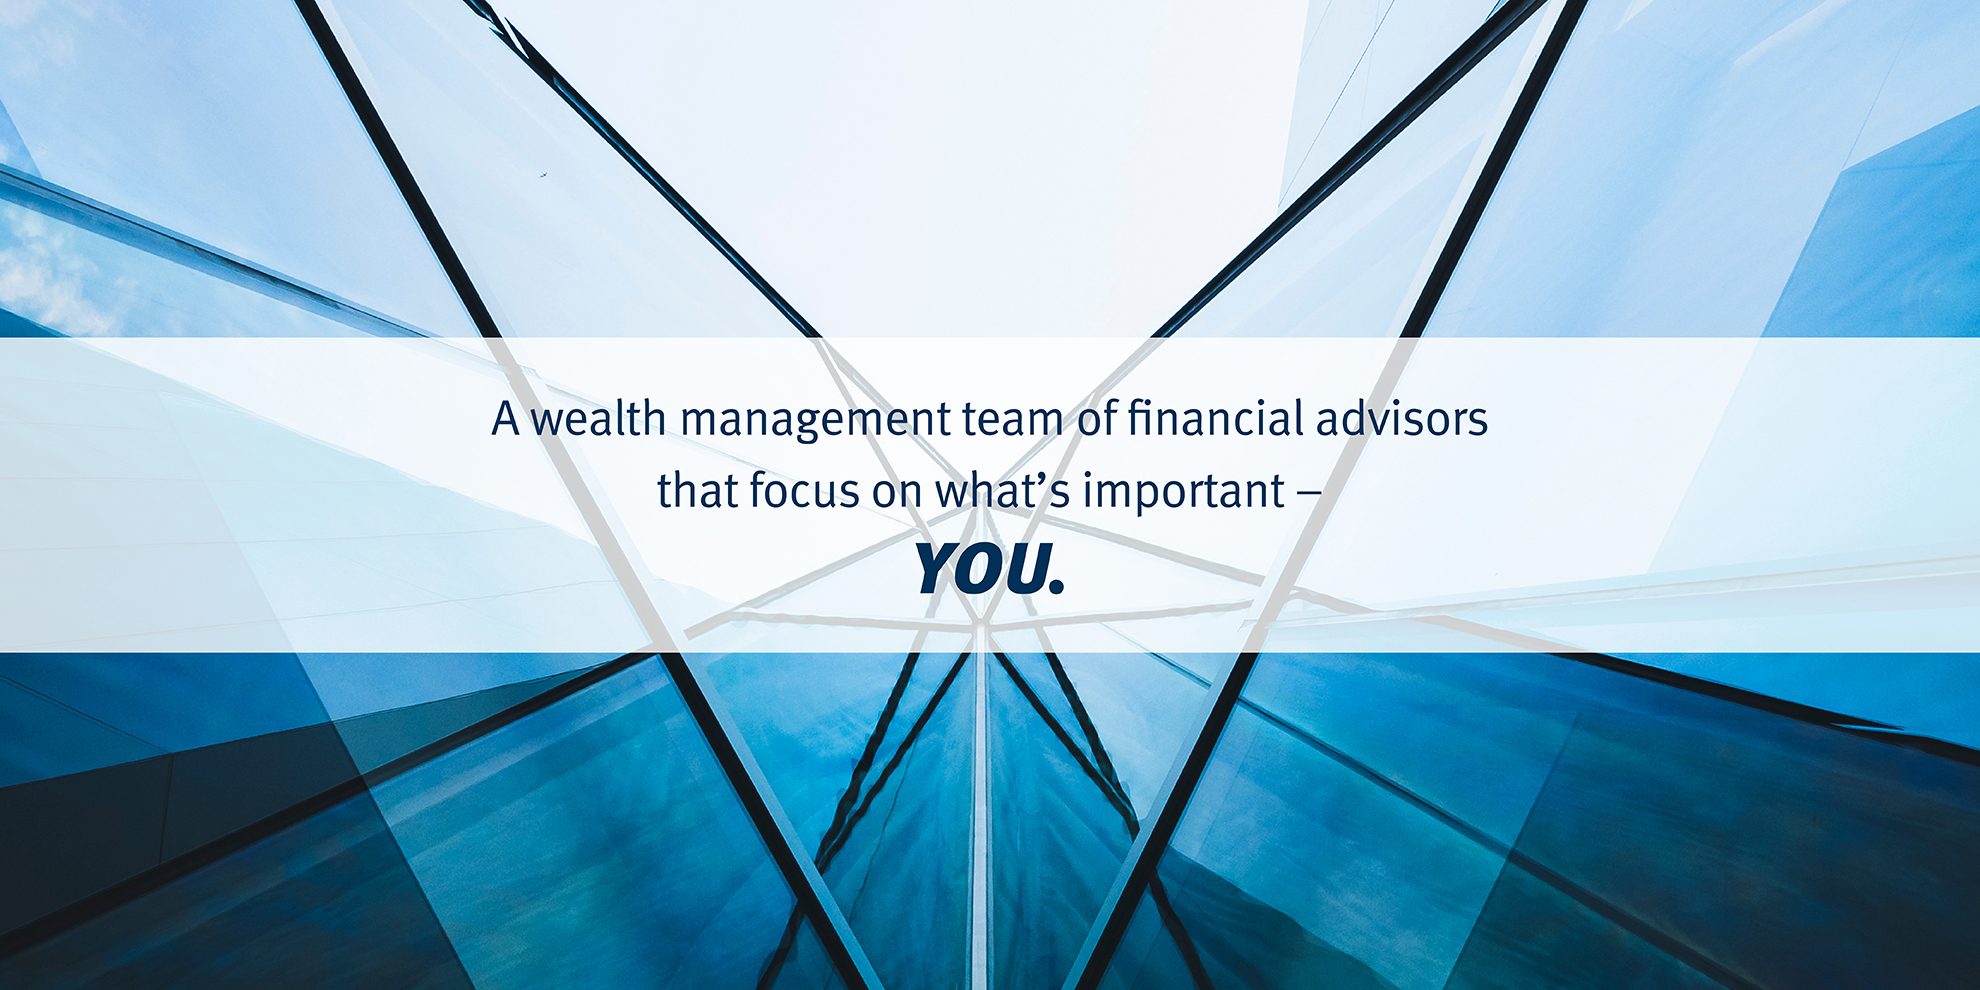 A wealth management team of financial advisors that focus on what’s important – YOU. with architecture detail glass facade in background